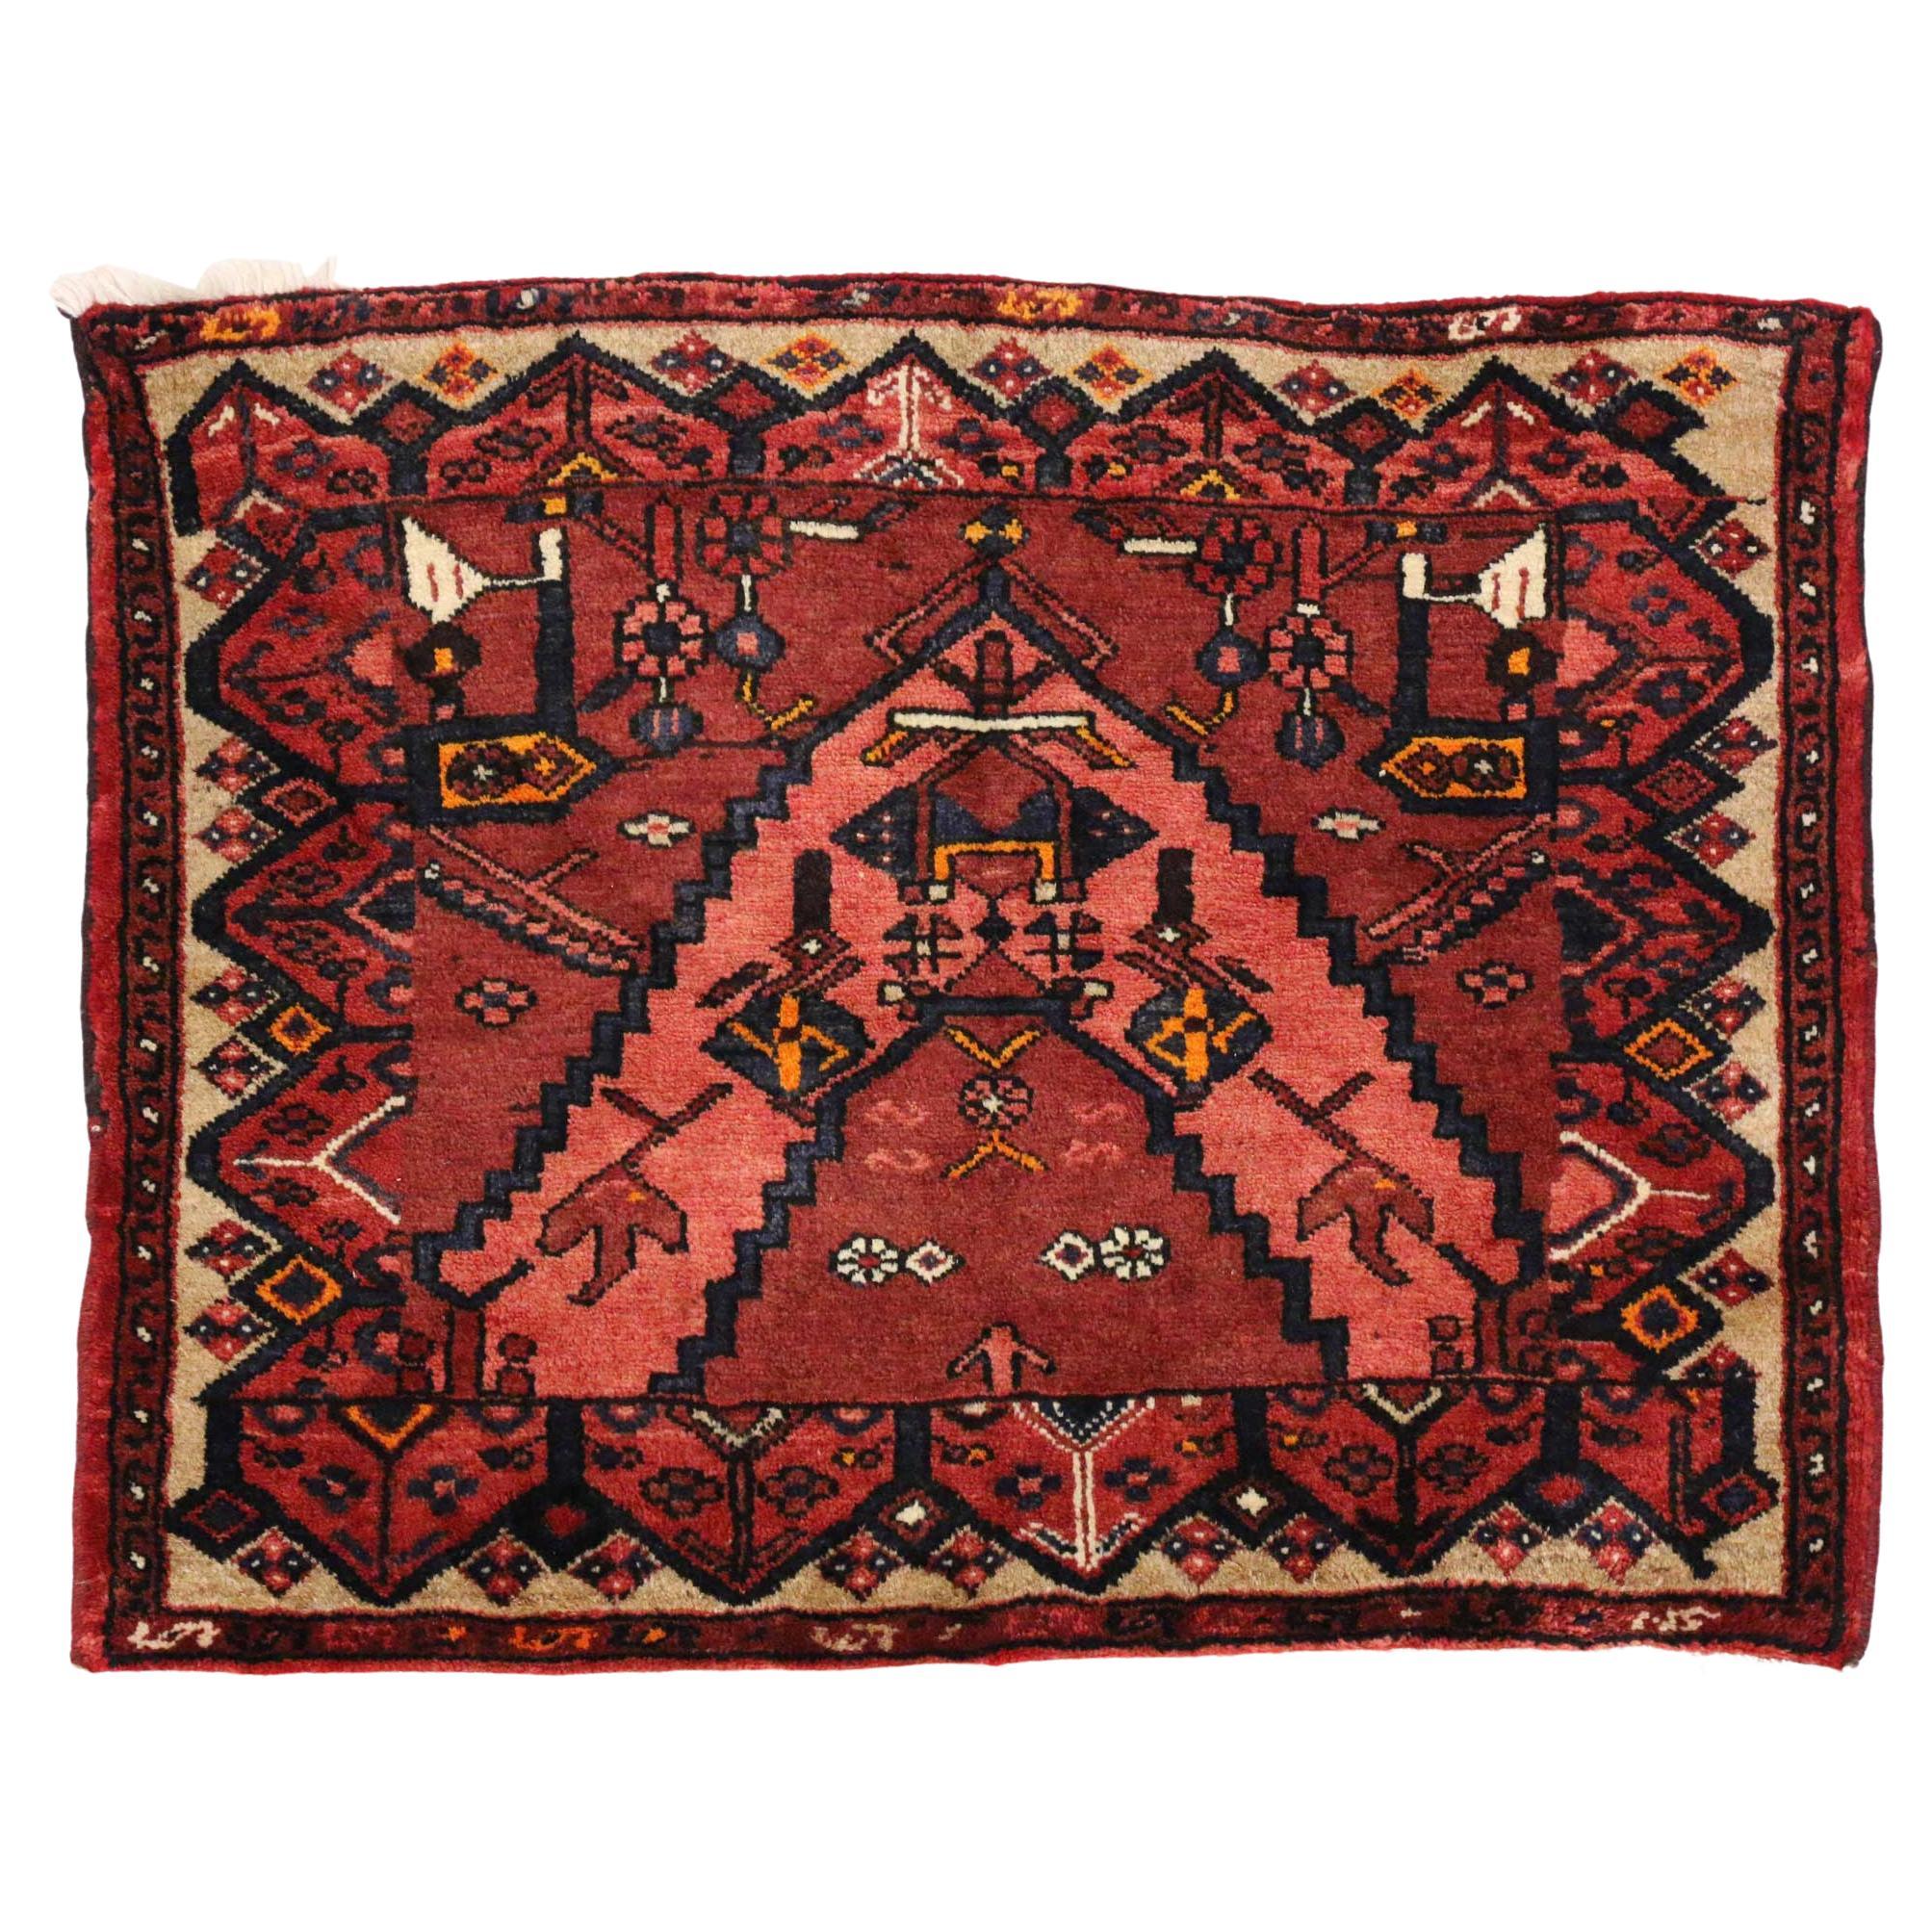 https://a.1stdibscdn.com/vintage-hamadan-accent-rug-with-modern-style-for-sale/f_9429/f_100207231678805664188/f_10020723_1678805665327_bg_processed.jpg